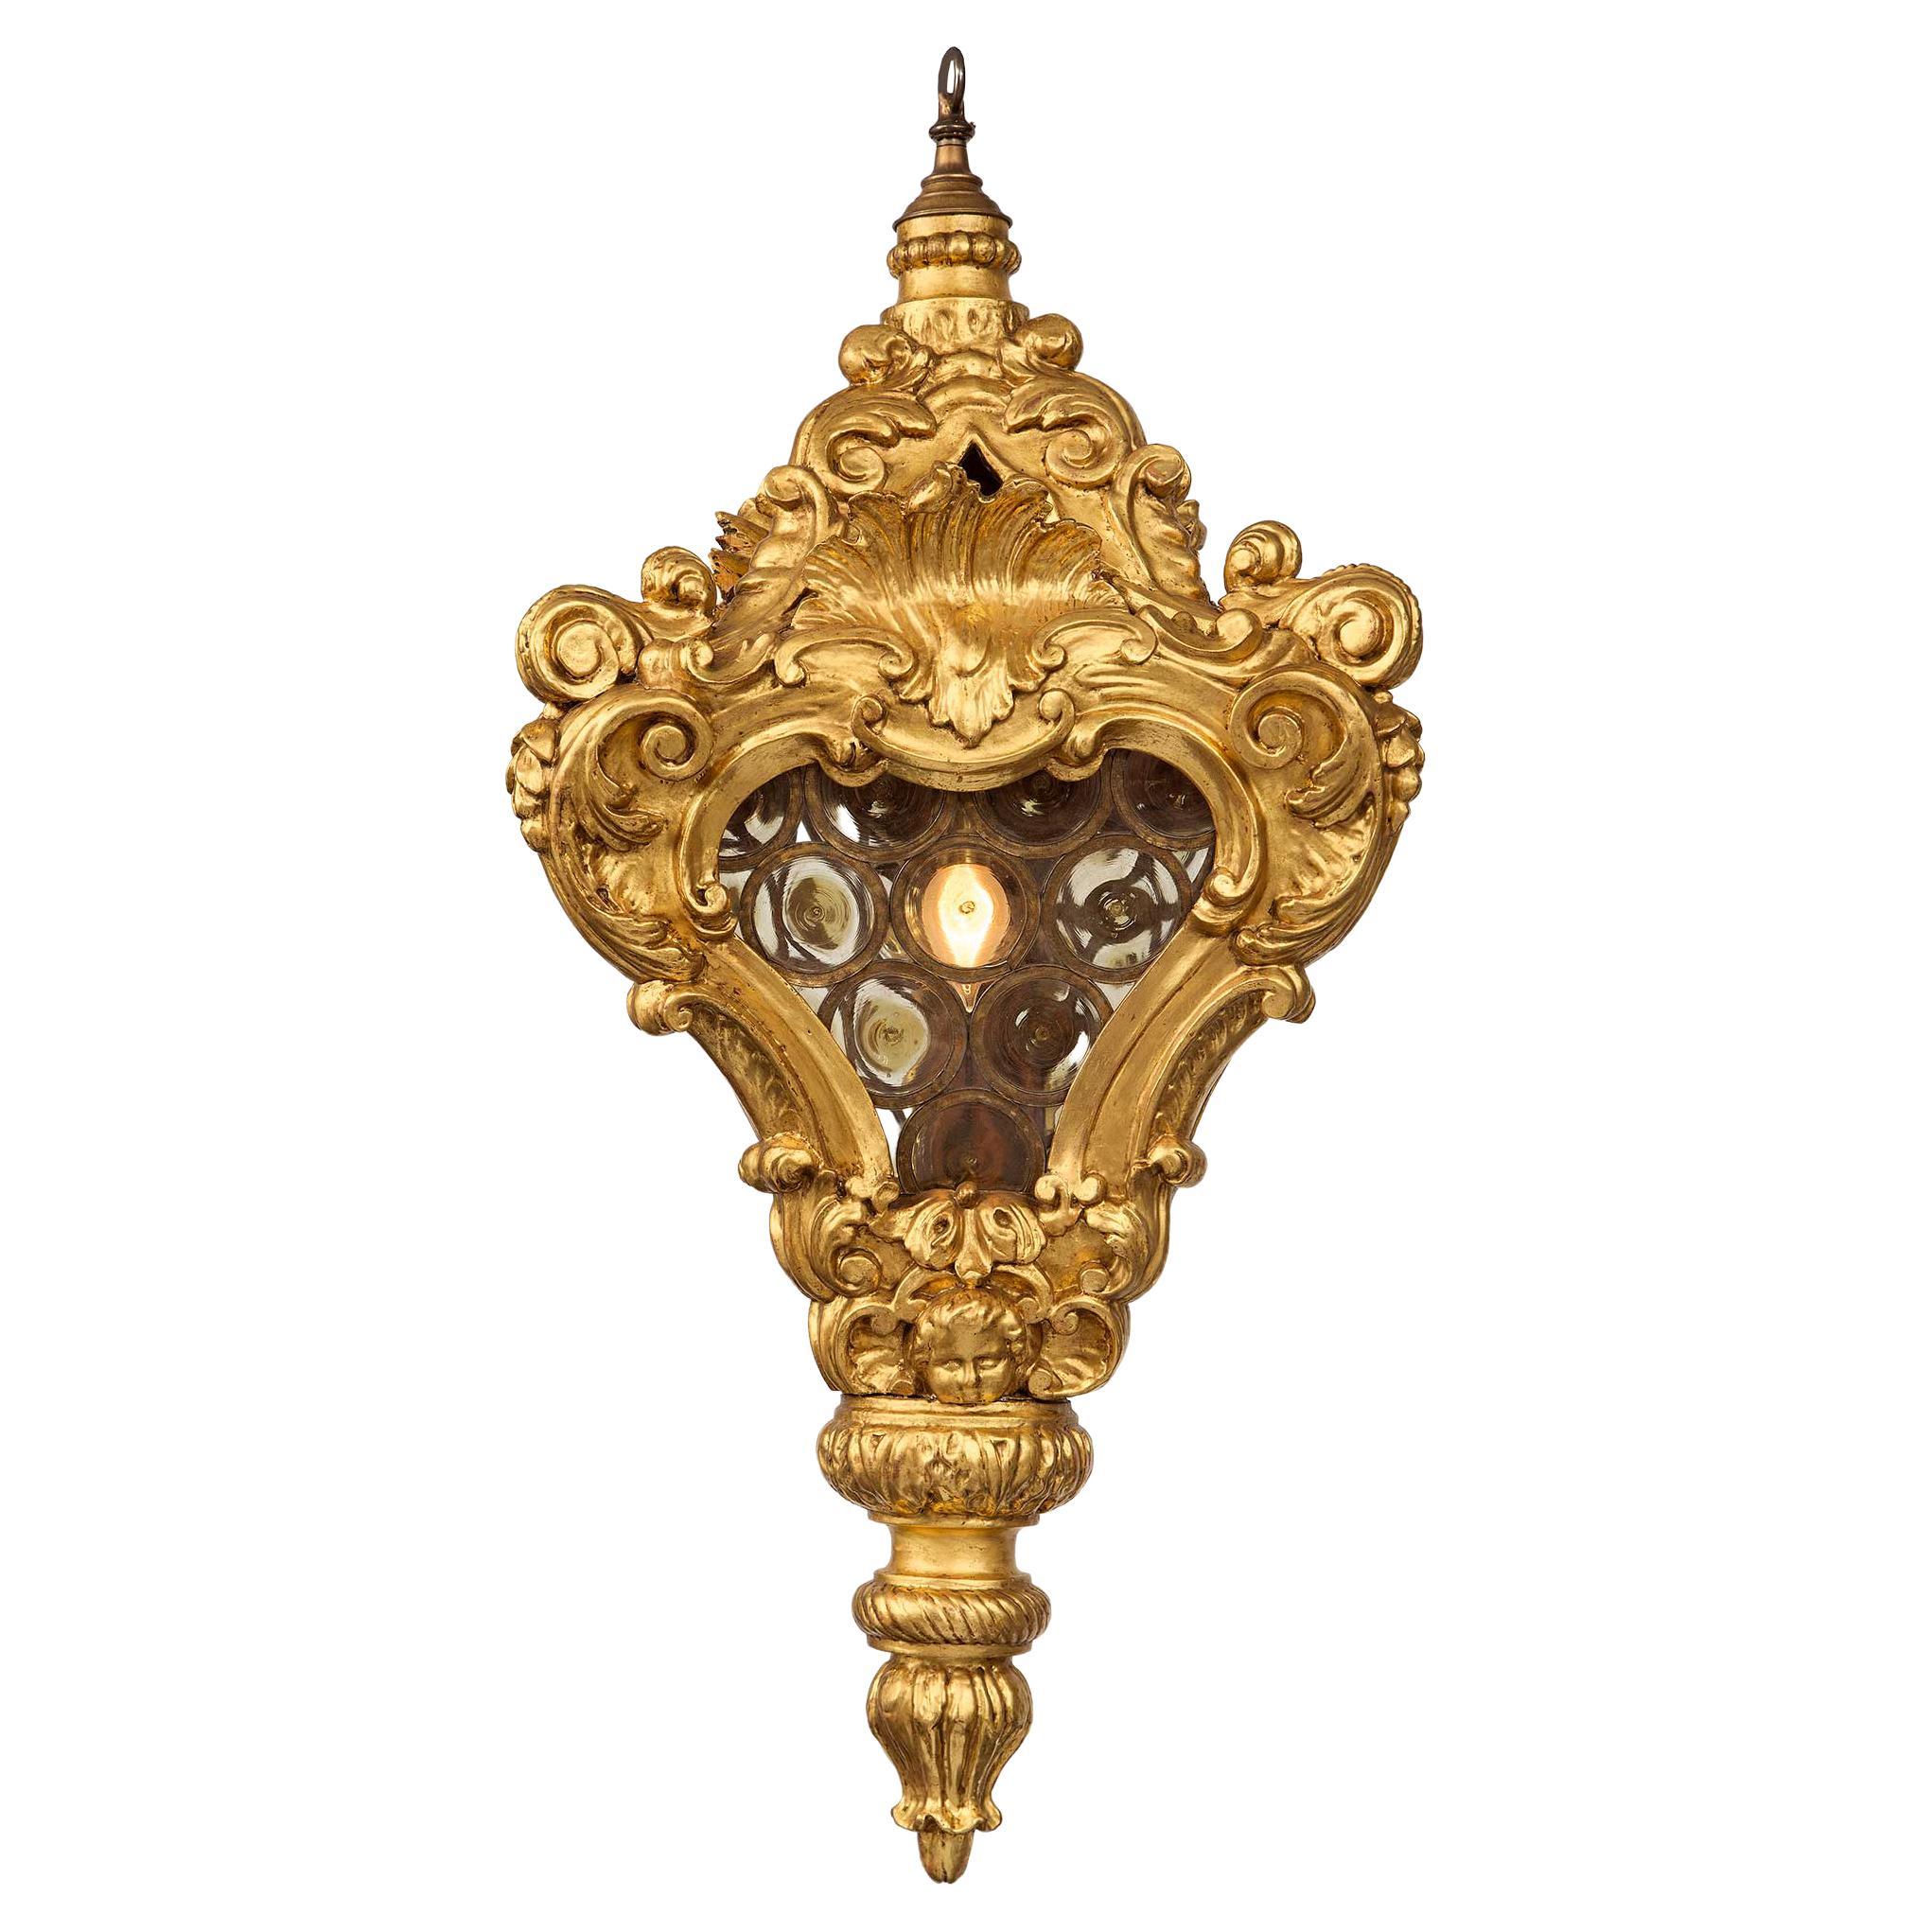 Italian 18th Century Baroque Period Giltwood and Glass Lantern For Sale